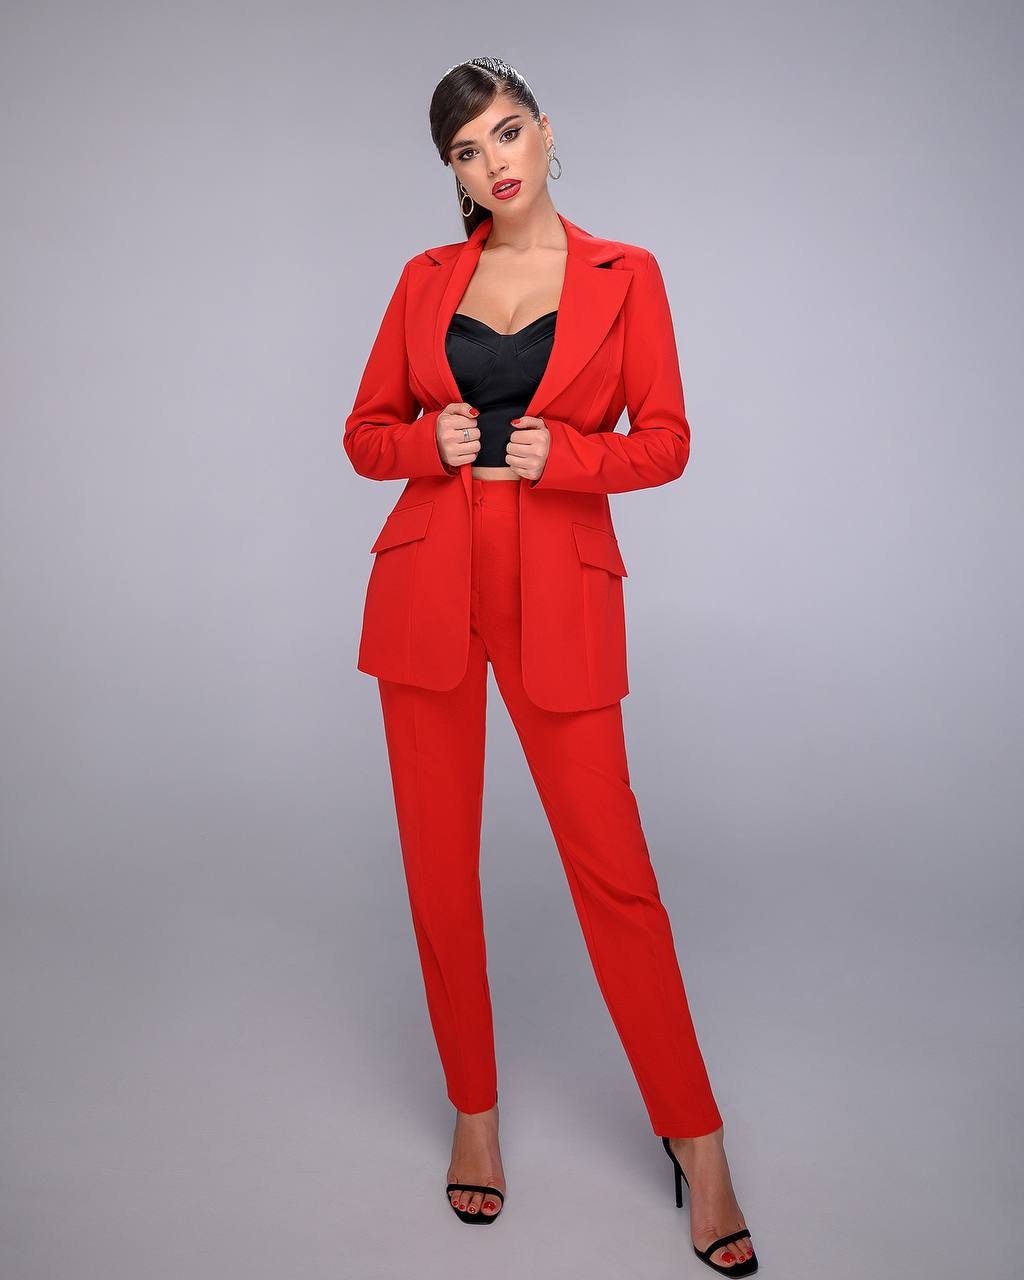 Red Pantsuit Set for Women, Red Blazer Trouser Suit for Women, Red